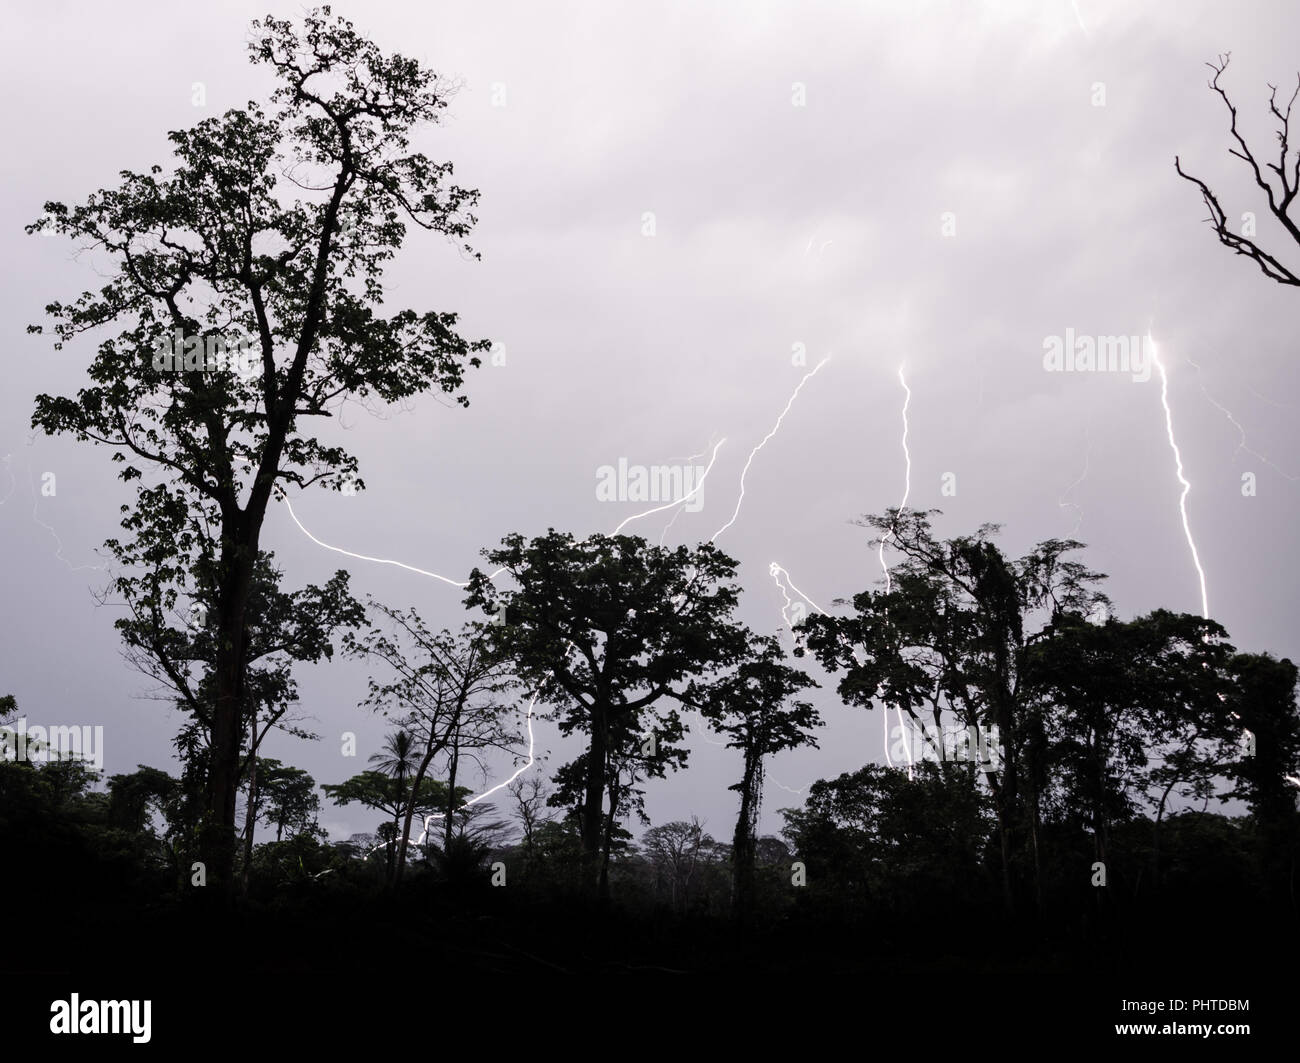 Many lightning strikes during dramatic thunderstorm with rain forest tree silhouettes in foreground, Cameroon, Africa. Stock Photo